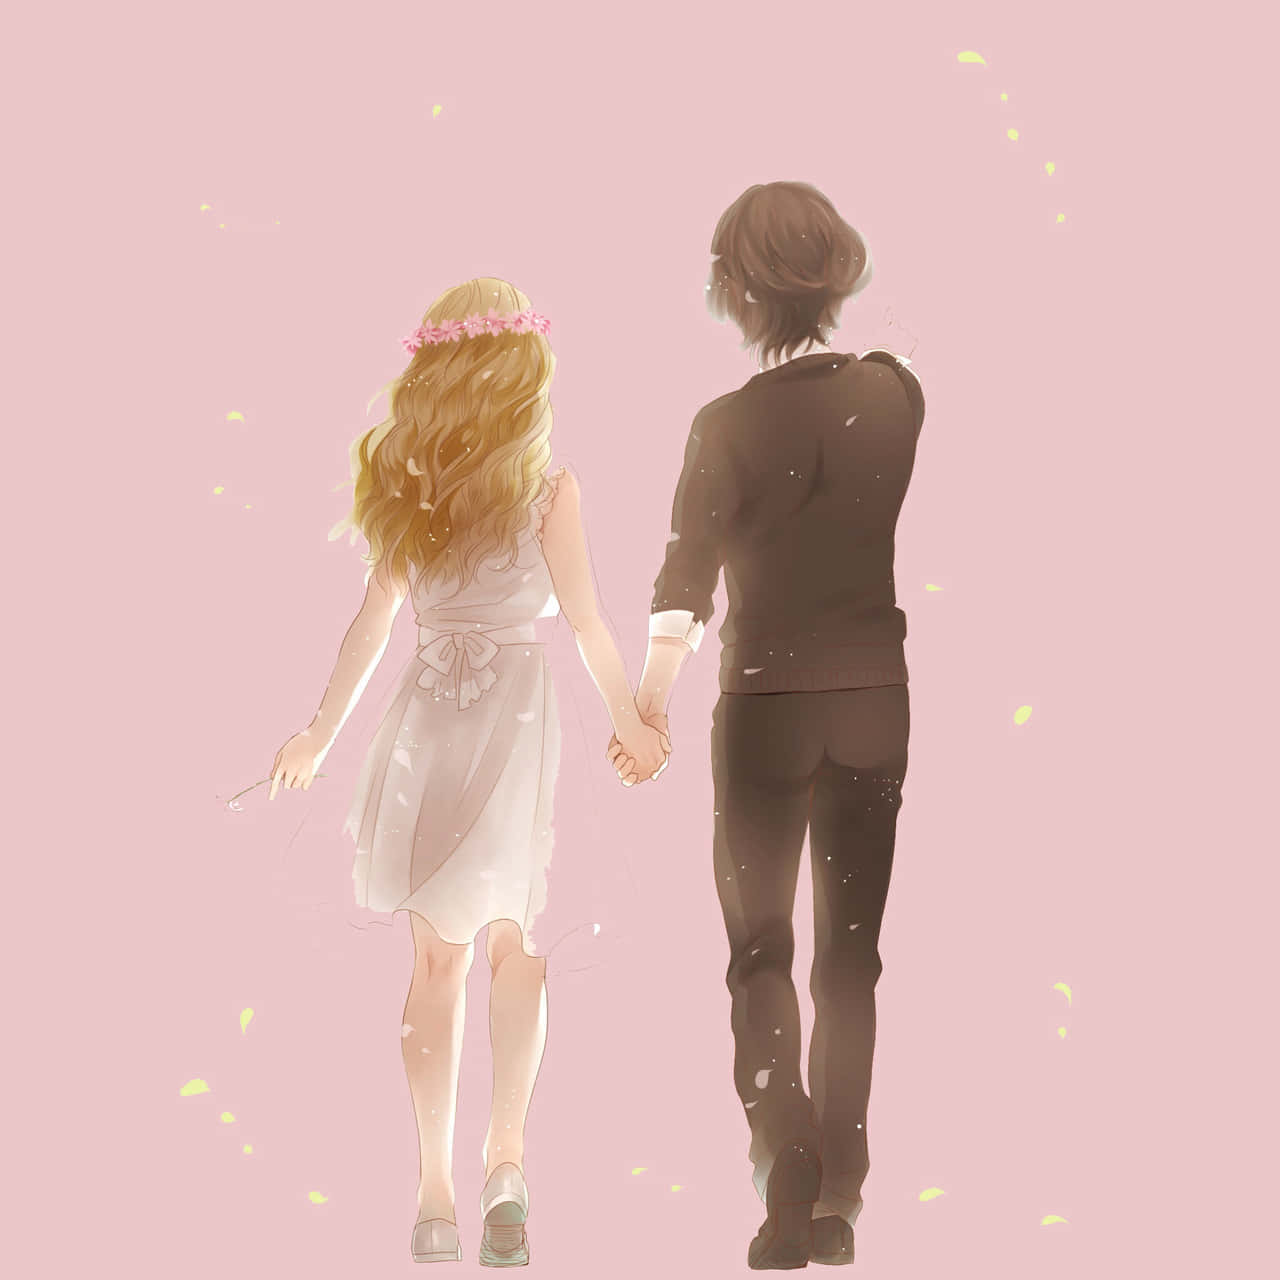 anime boy and girl holding hands